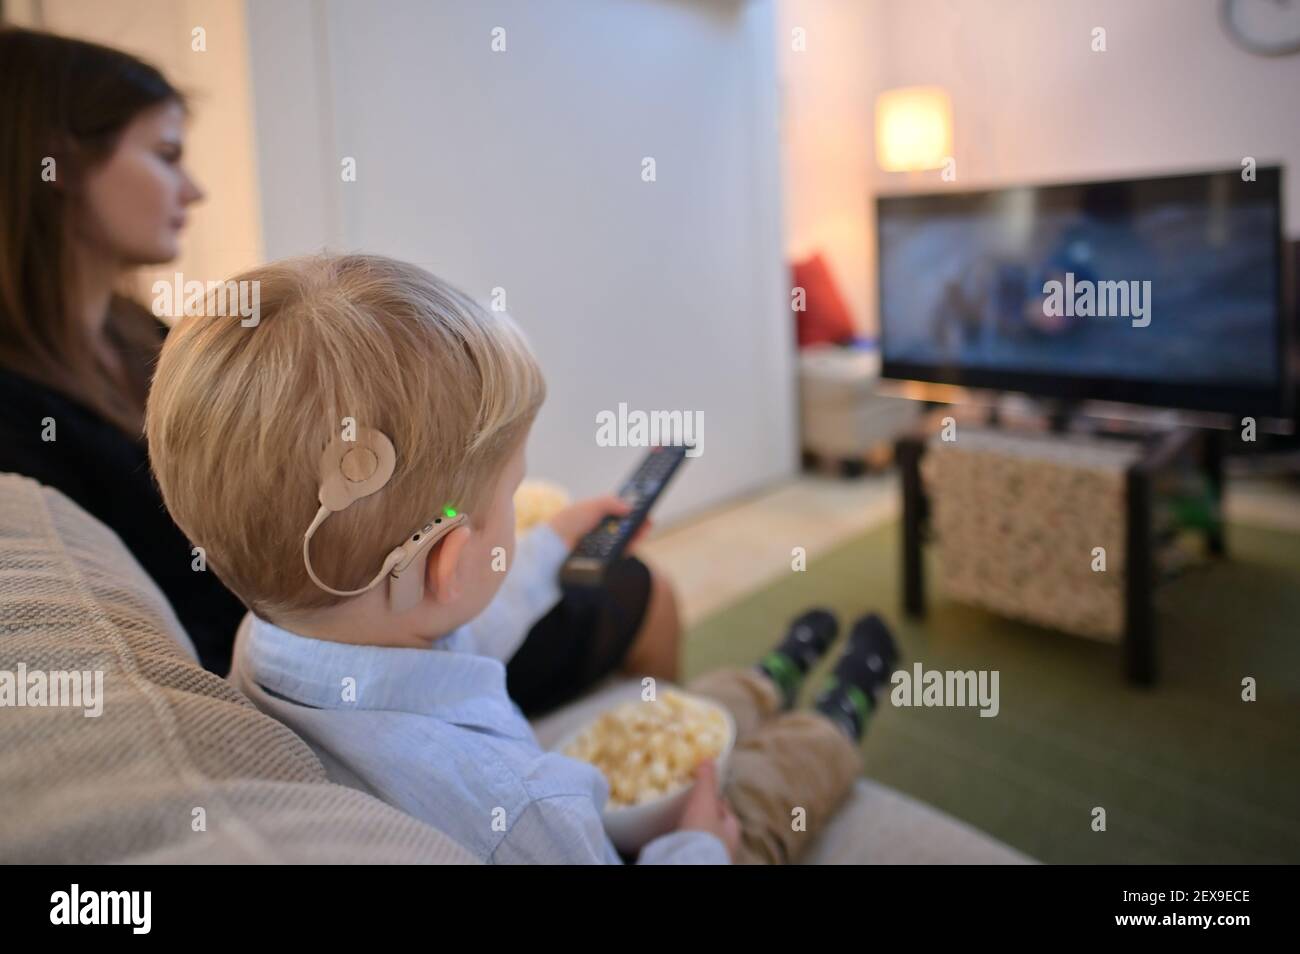 A Boy With Cochlear Implants watching Television At Home Stock Photo